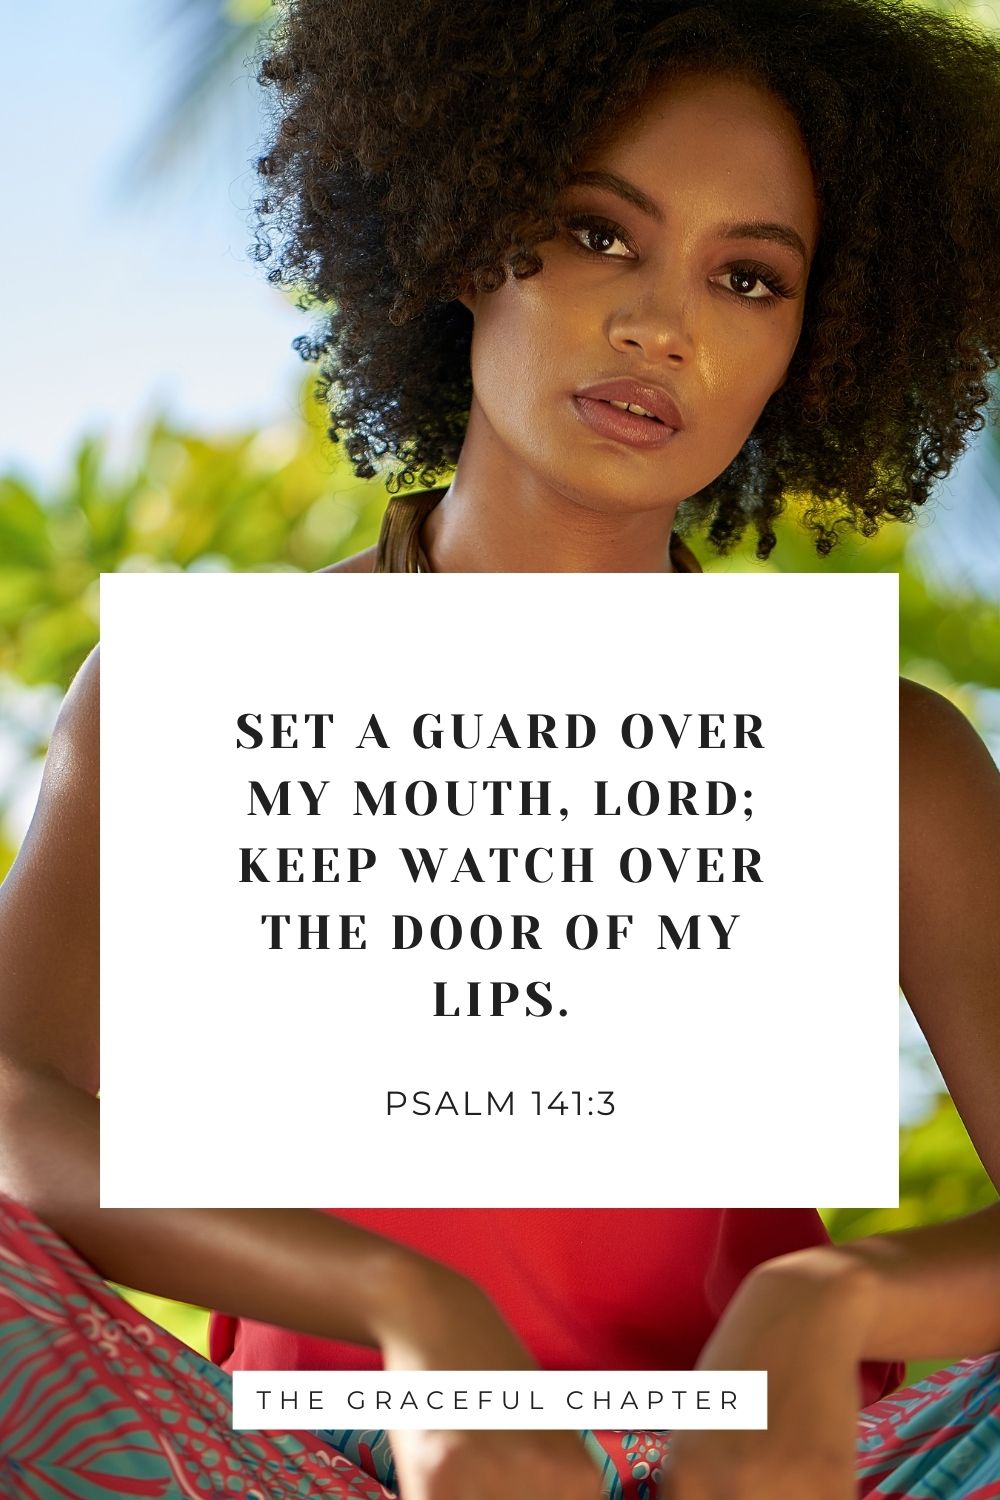 Set a guard over my mouth, Lord; keep watch over the door of my lips. Psalm 141:3